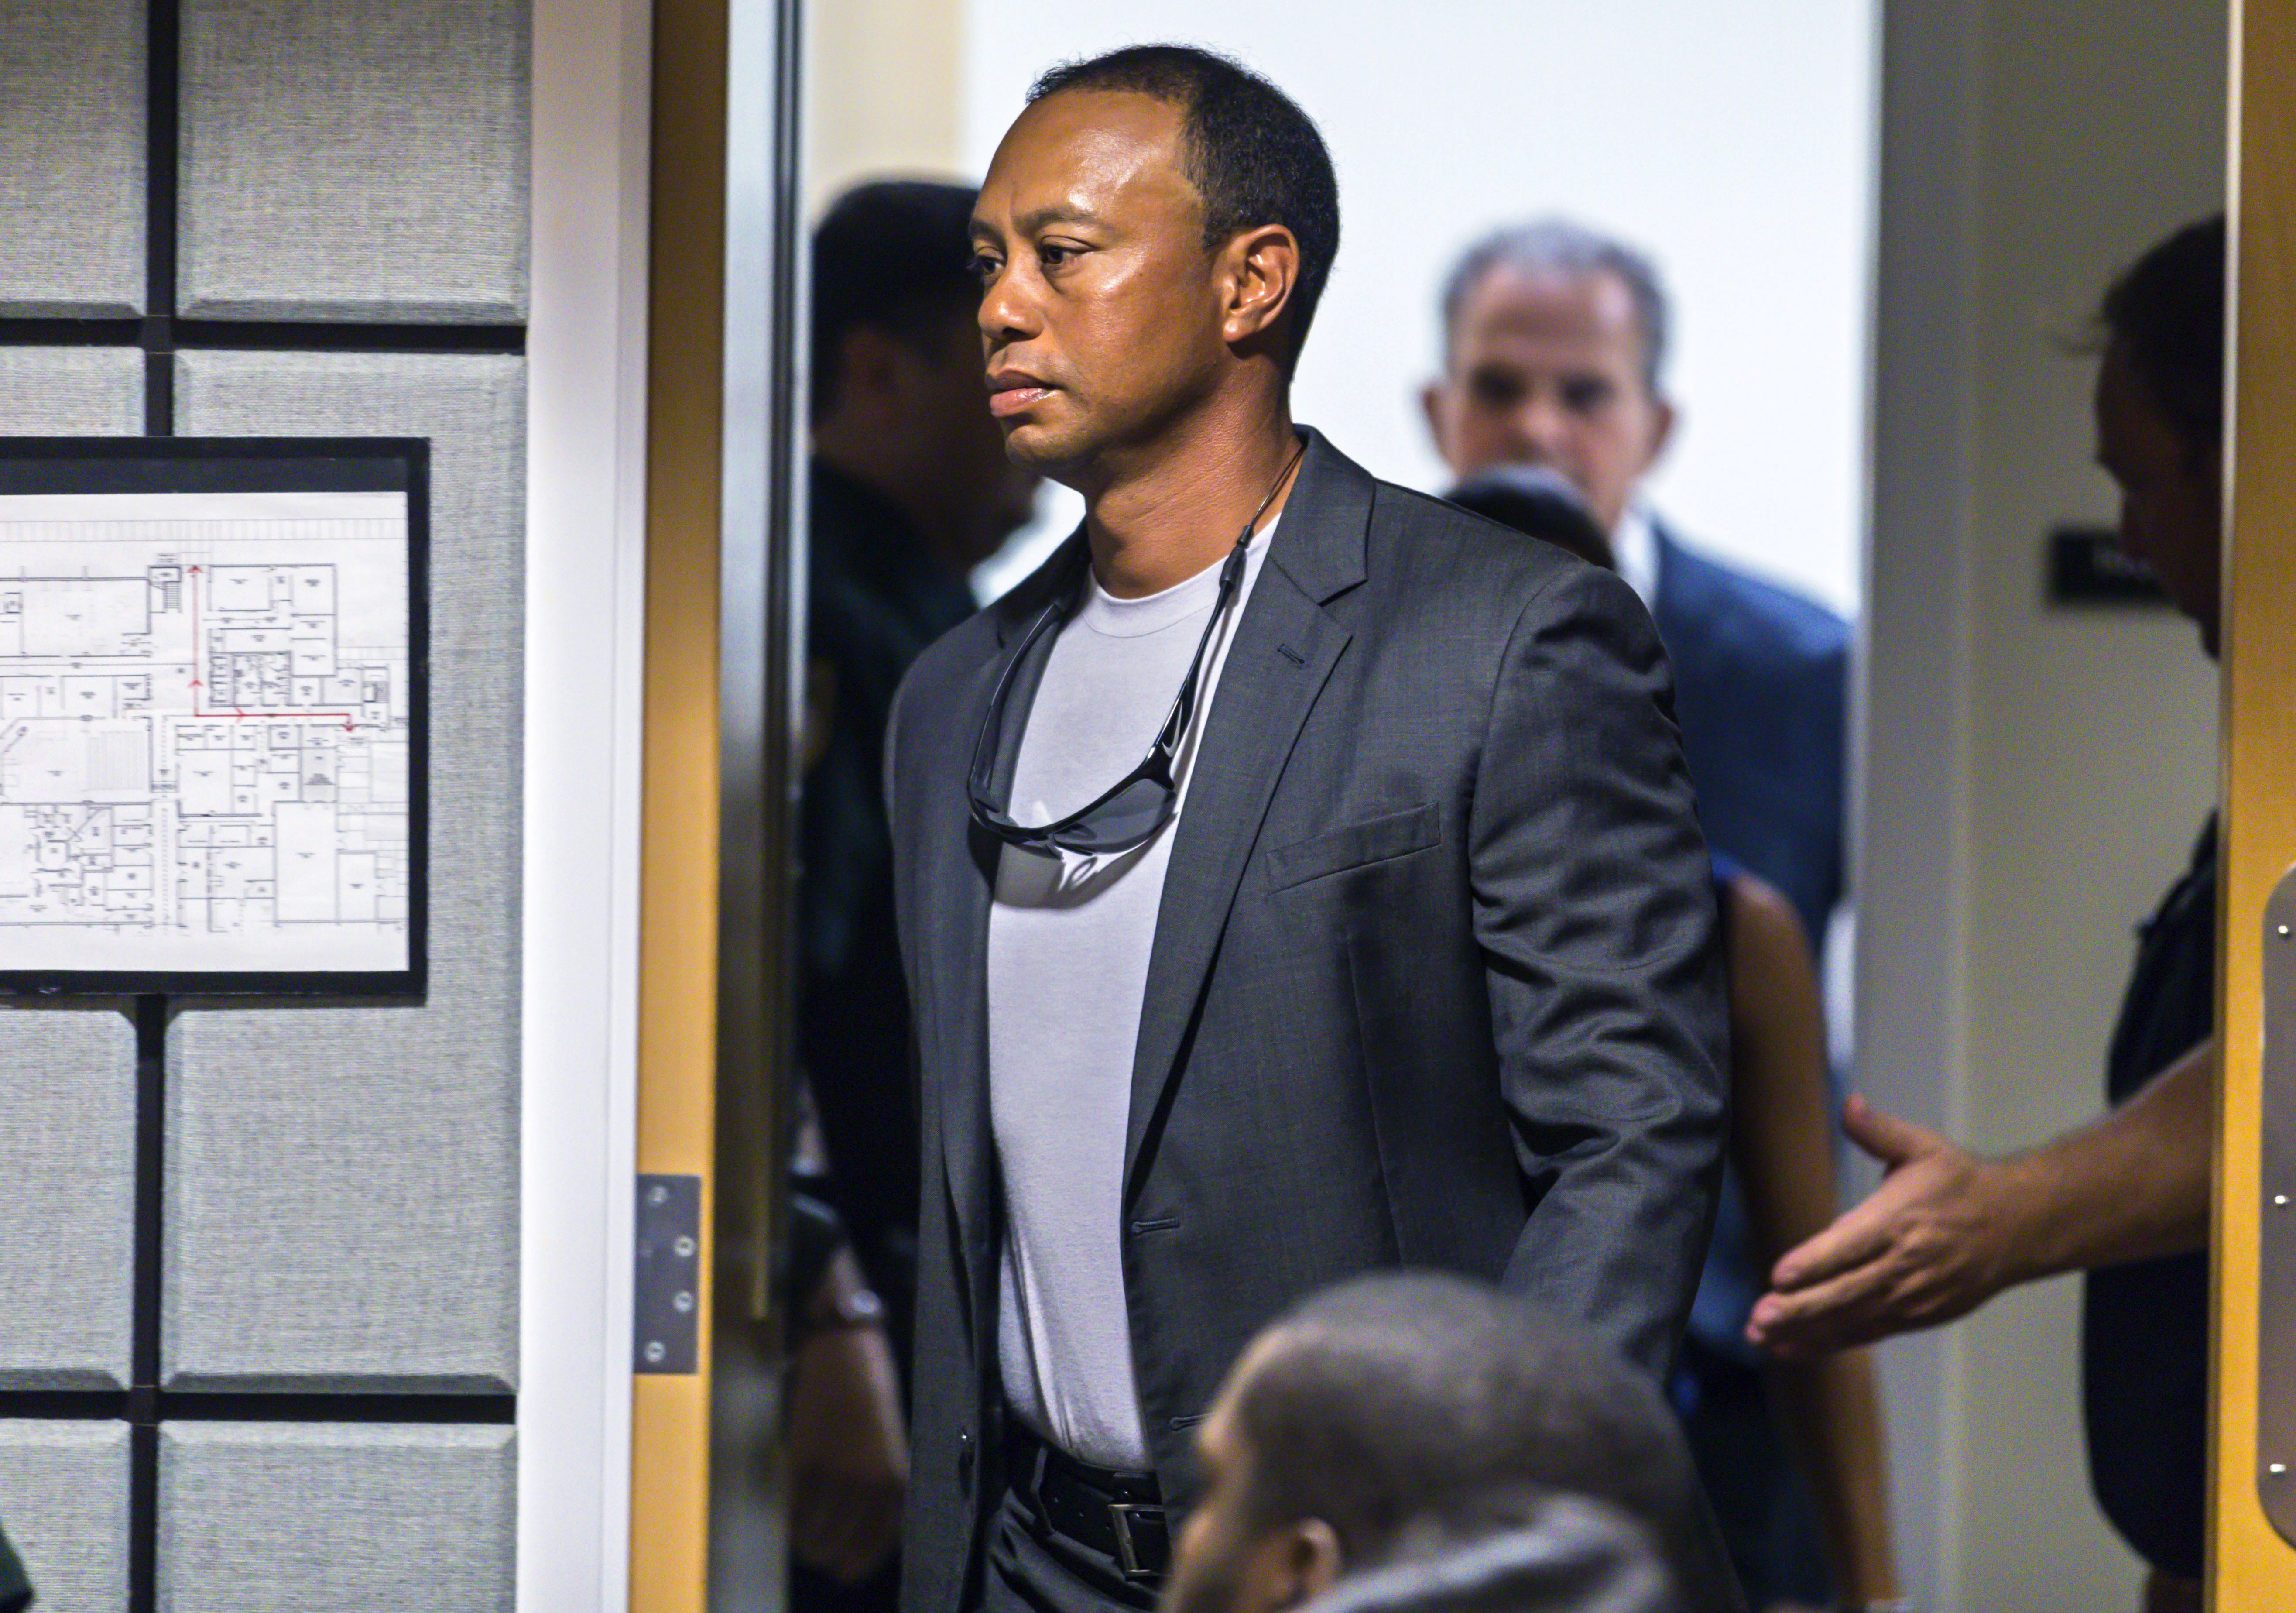 Tiger Woods entering Palm Beach County court on October 27, 2017 in Palm Beach Gardens, Florida. | Source: Getty Images